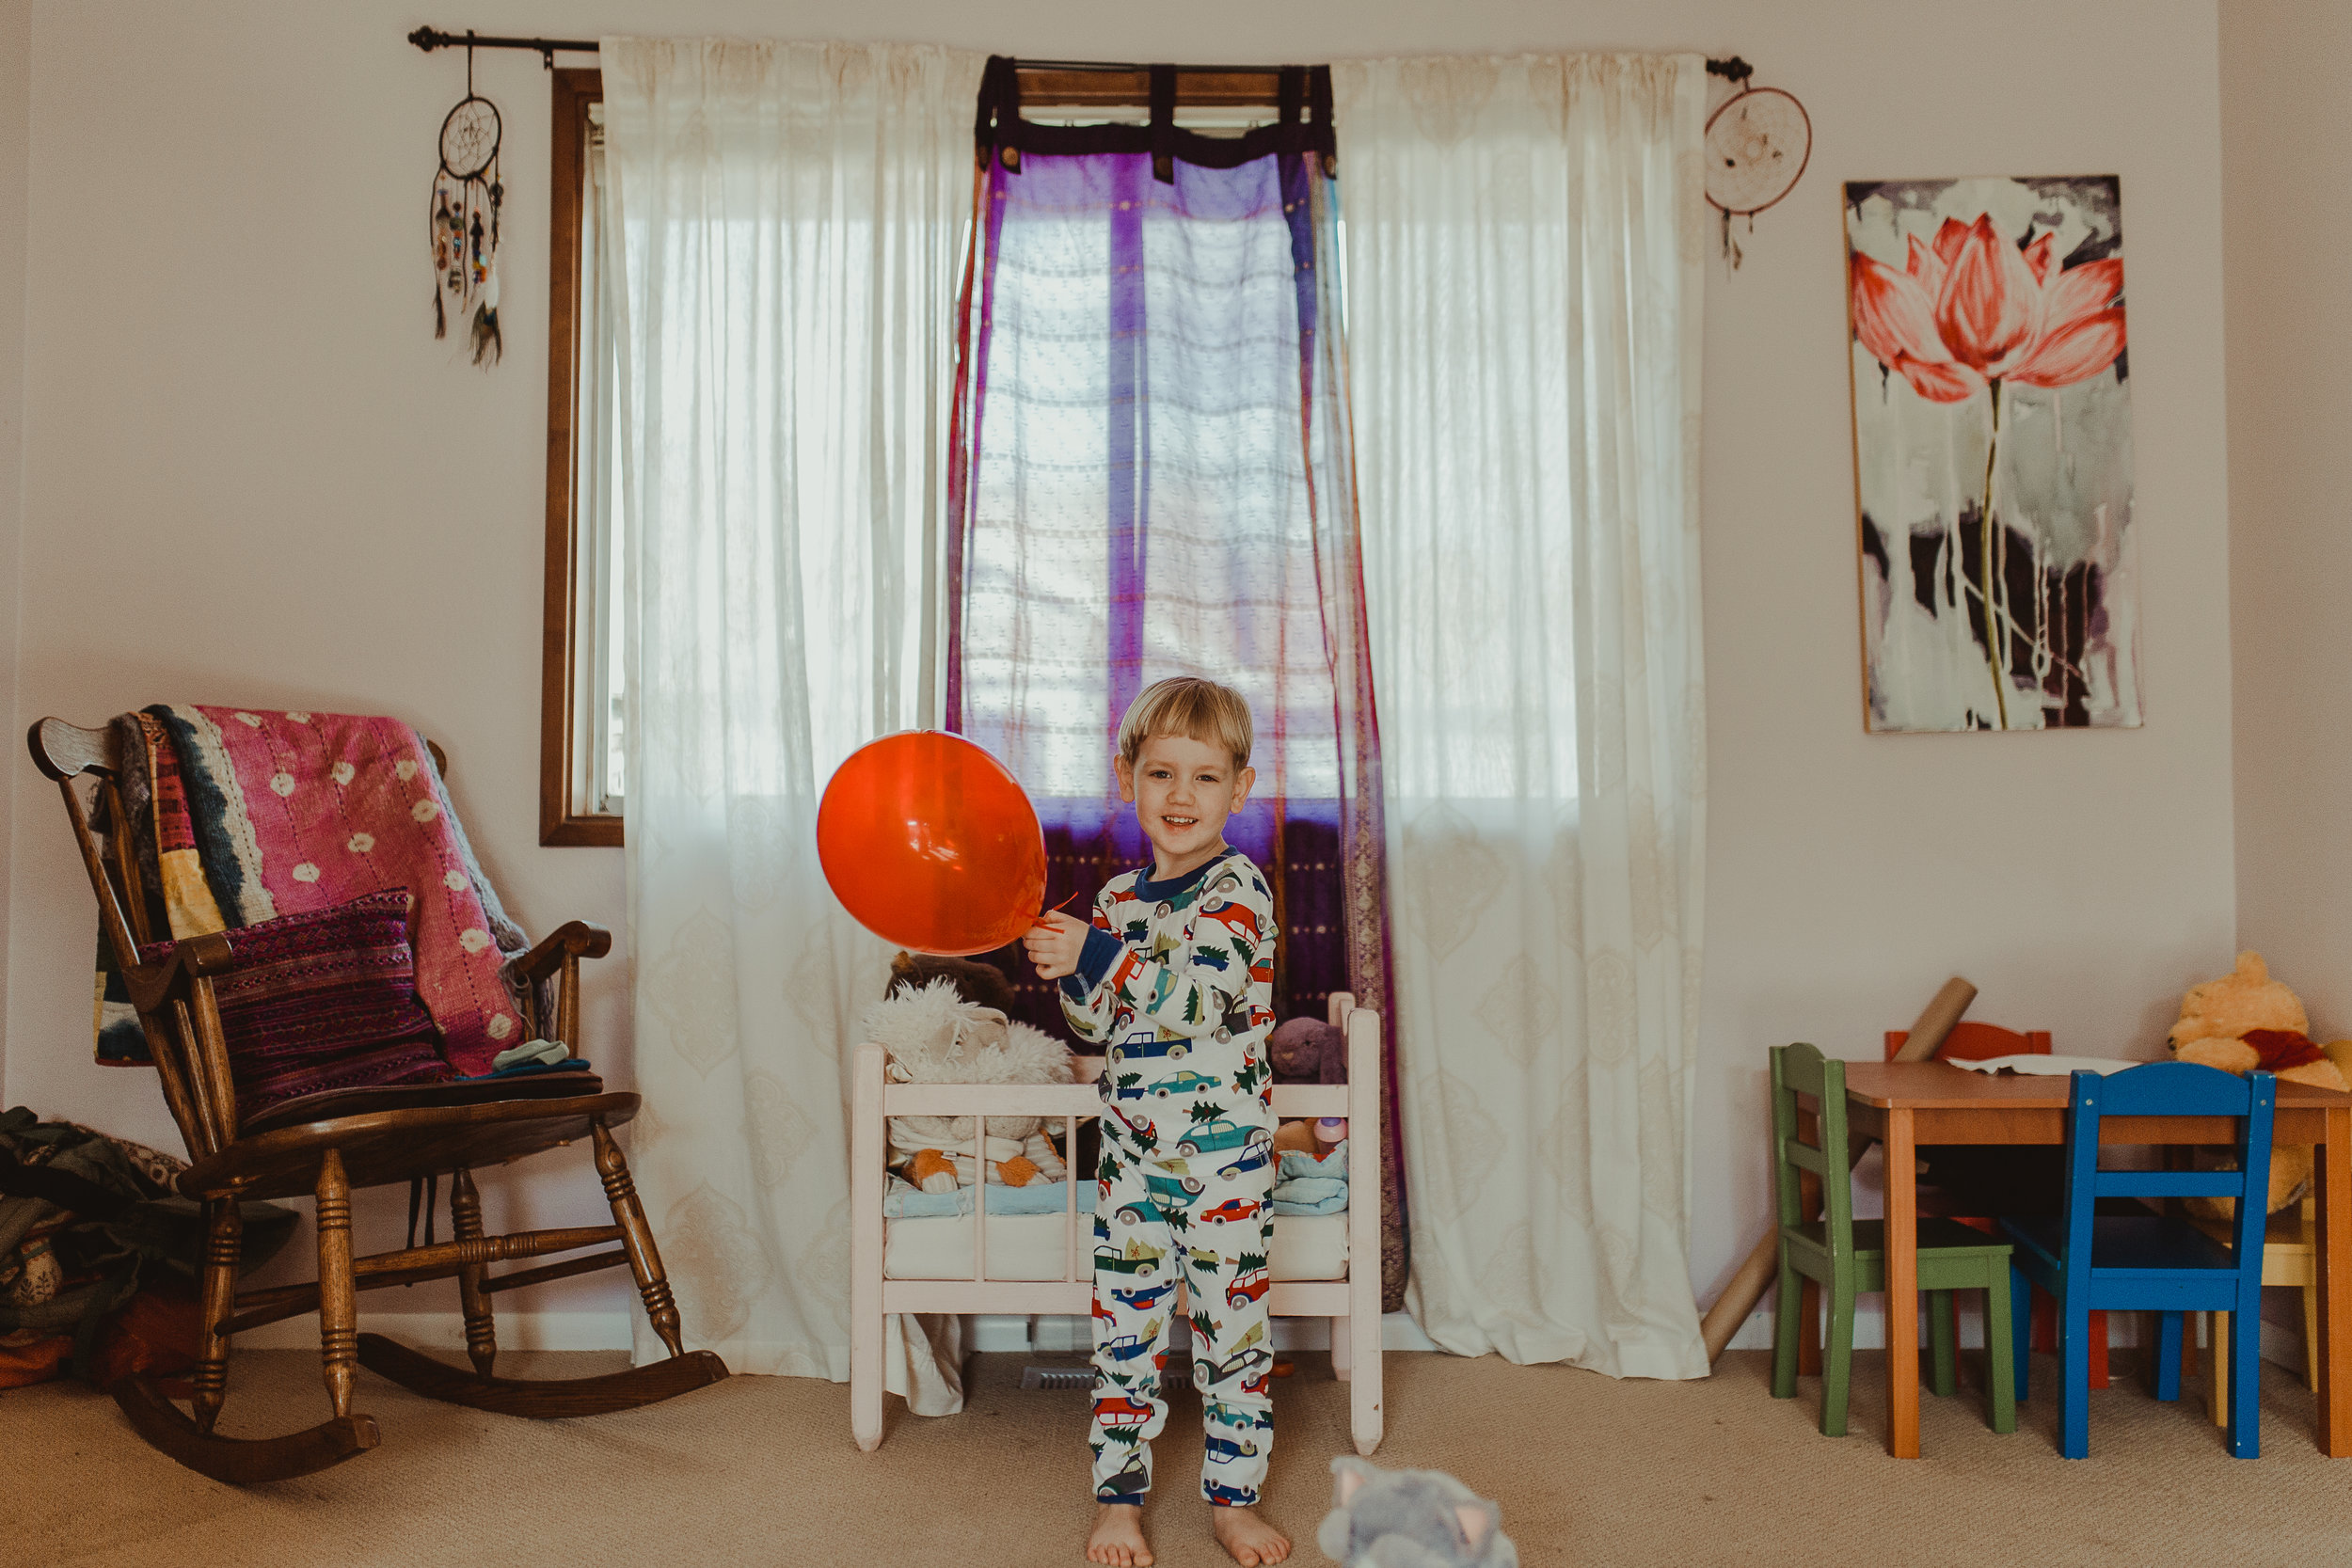  Toddler boy wearing pajamas playing with red balloon in Southern Oregon home. 